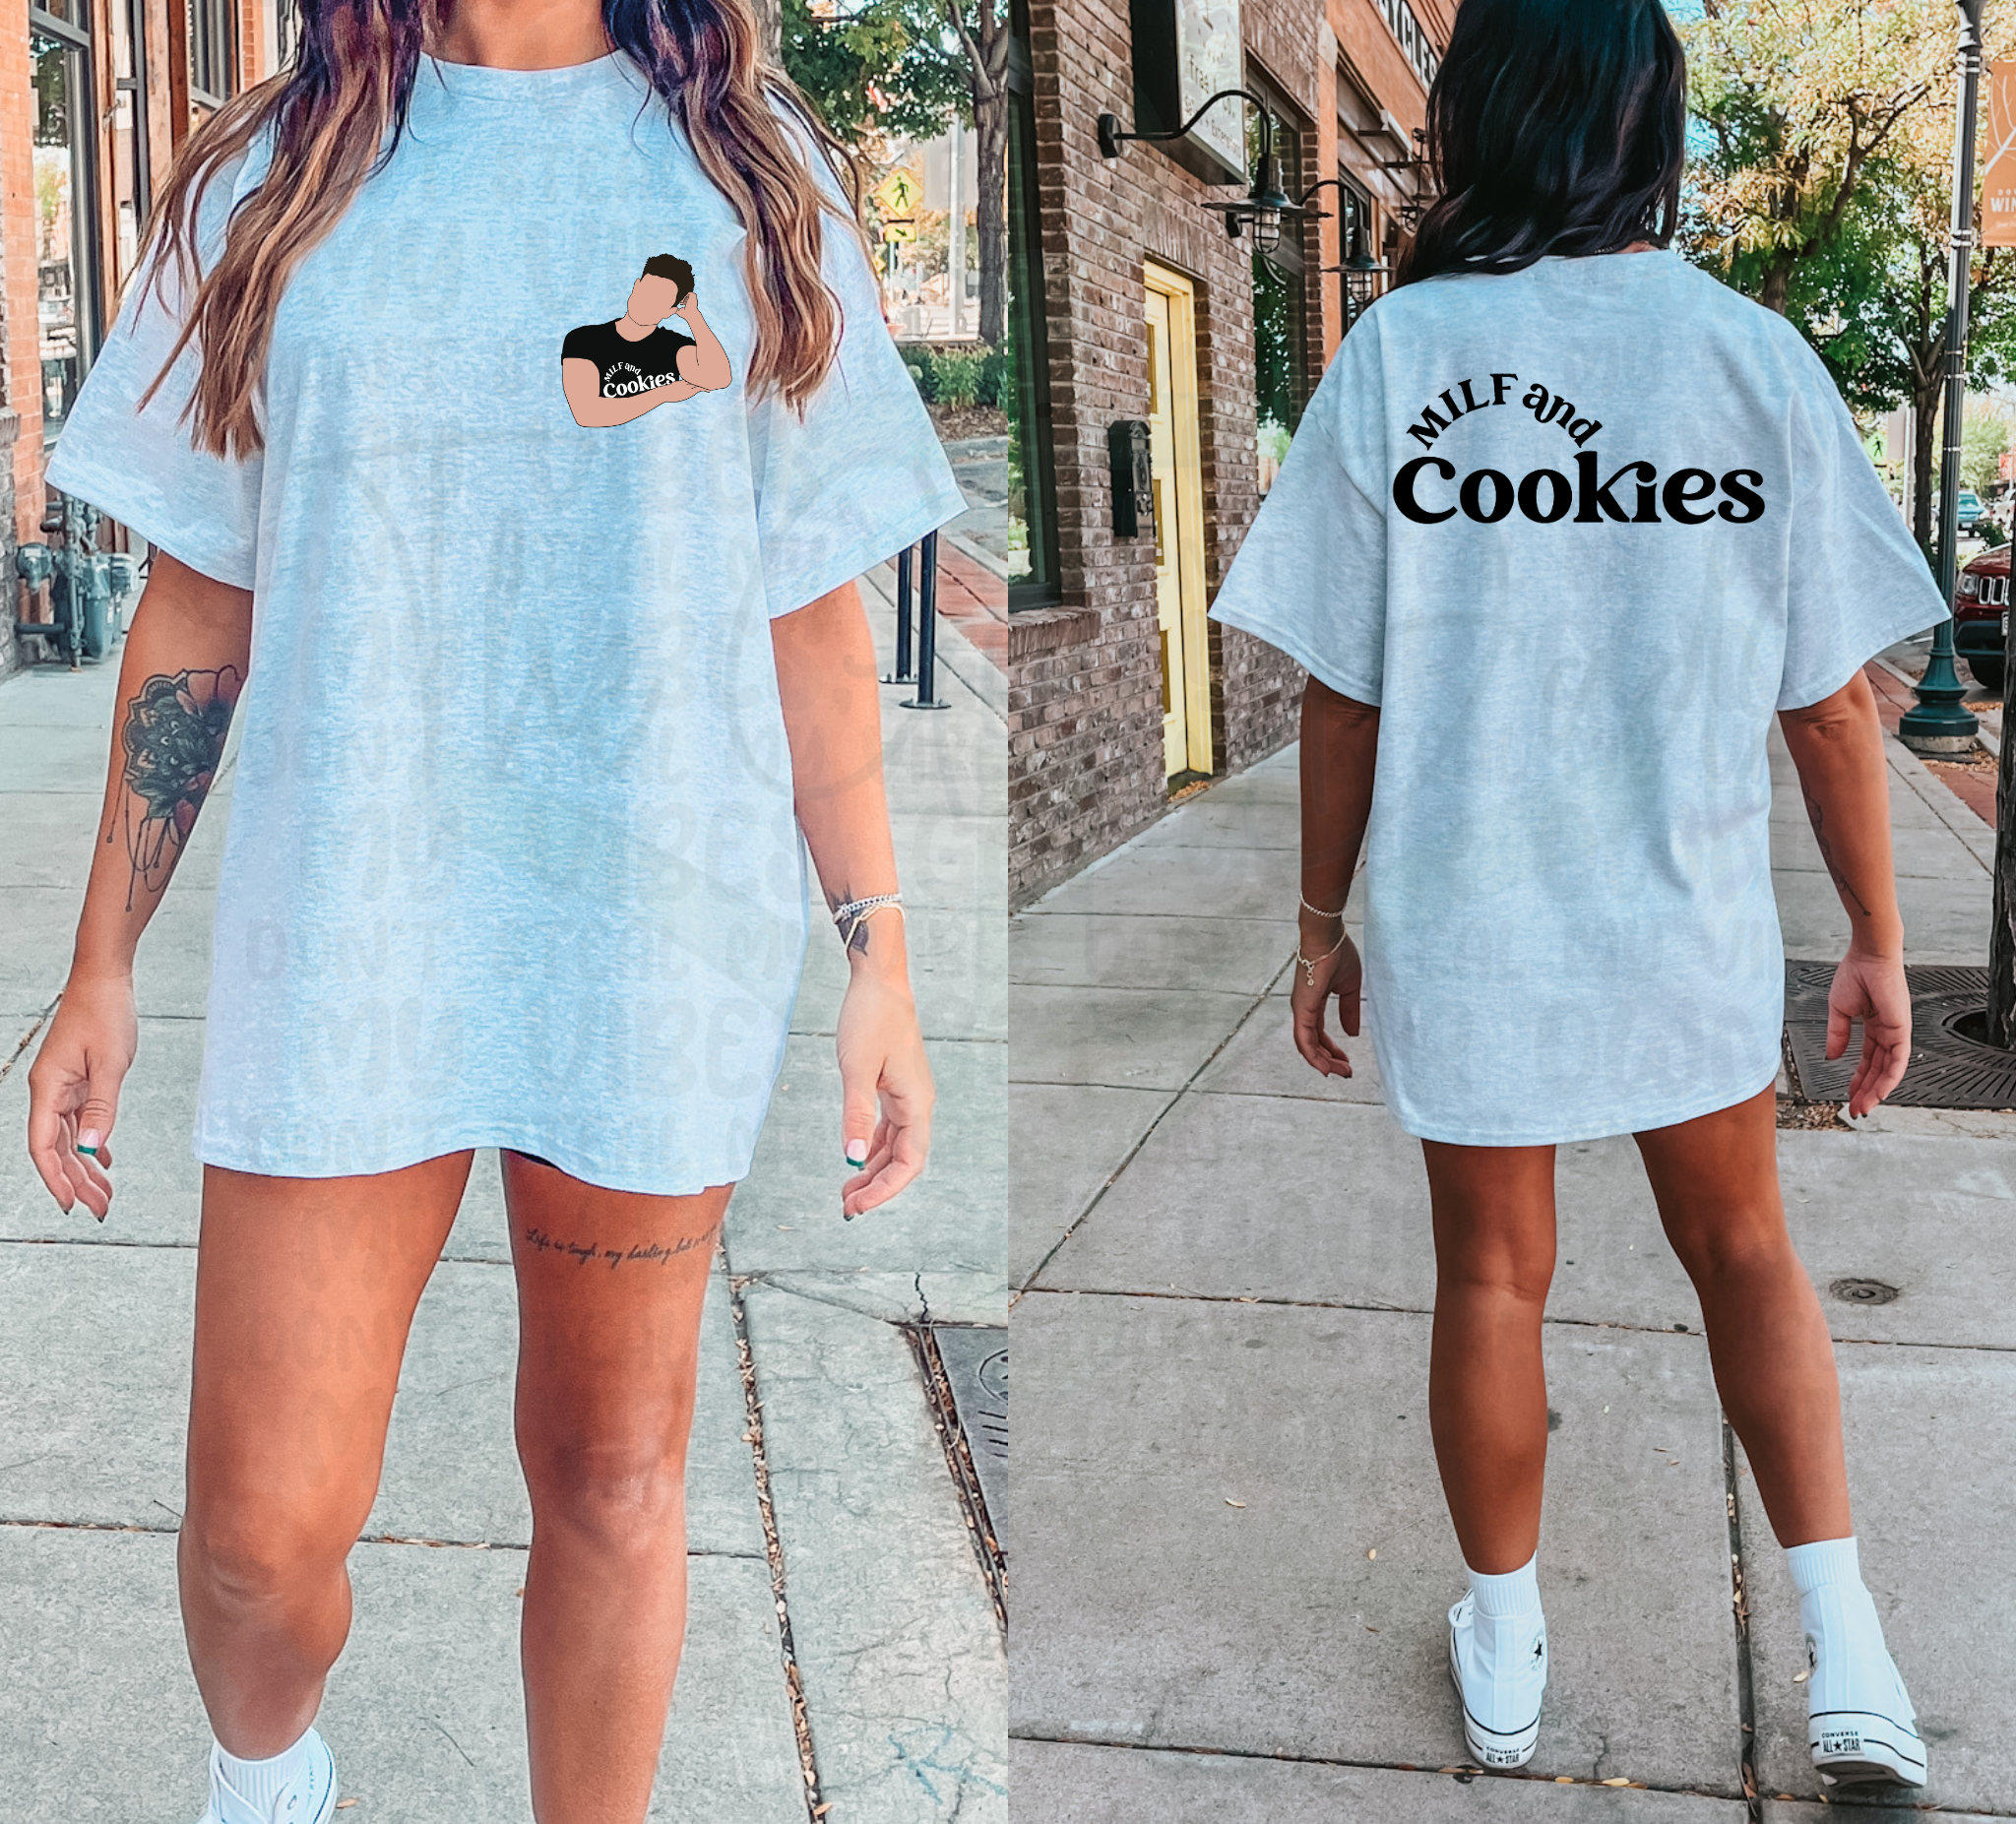 Milf And Cookies (Front & Back) Top Design